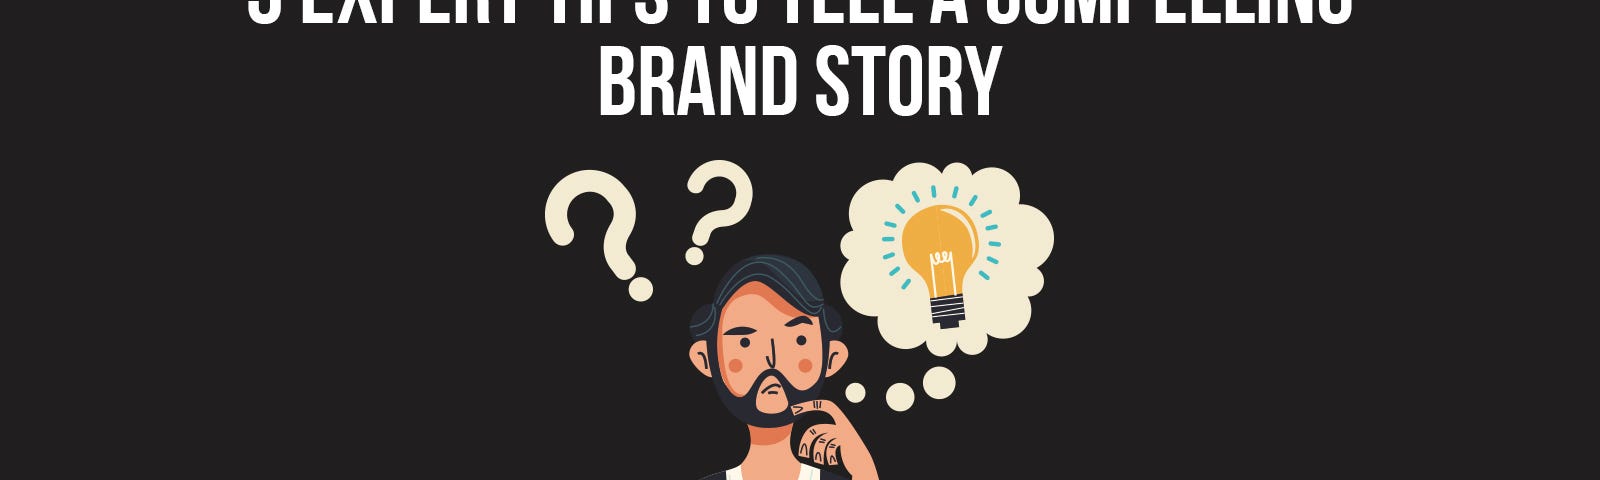 Brand Story, Expert Tips, Audience Engagement